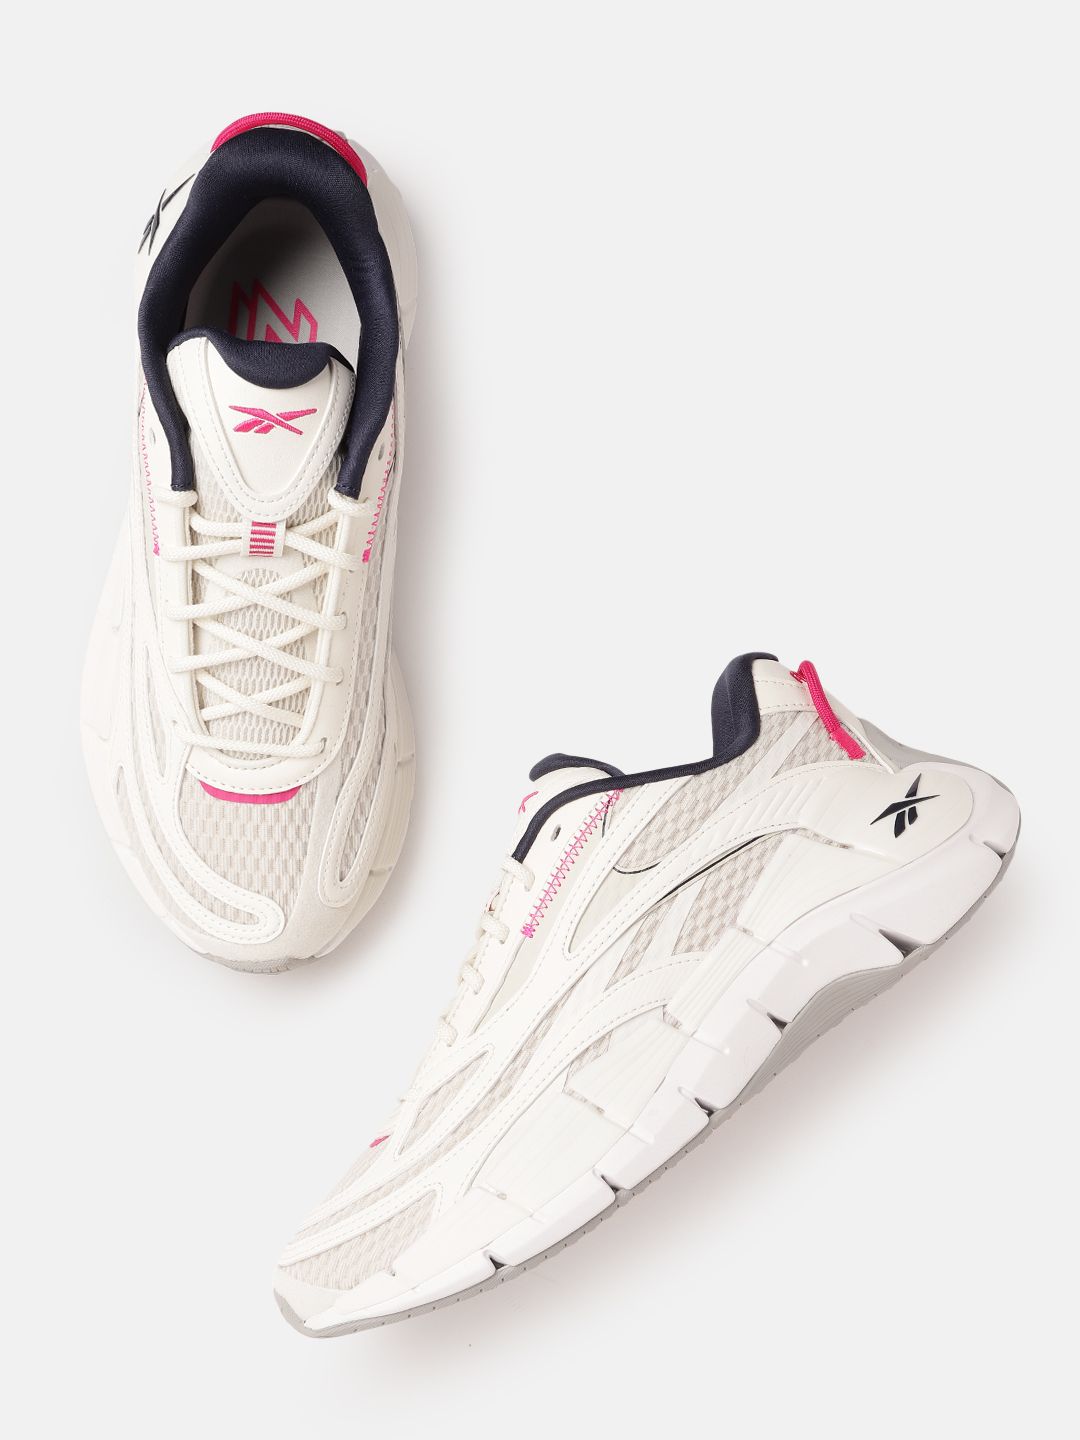 Reebok Women Off White Woven Design Zig Kinetica 2.5 Running Shoes Price in India